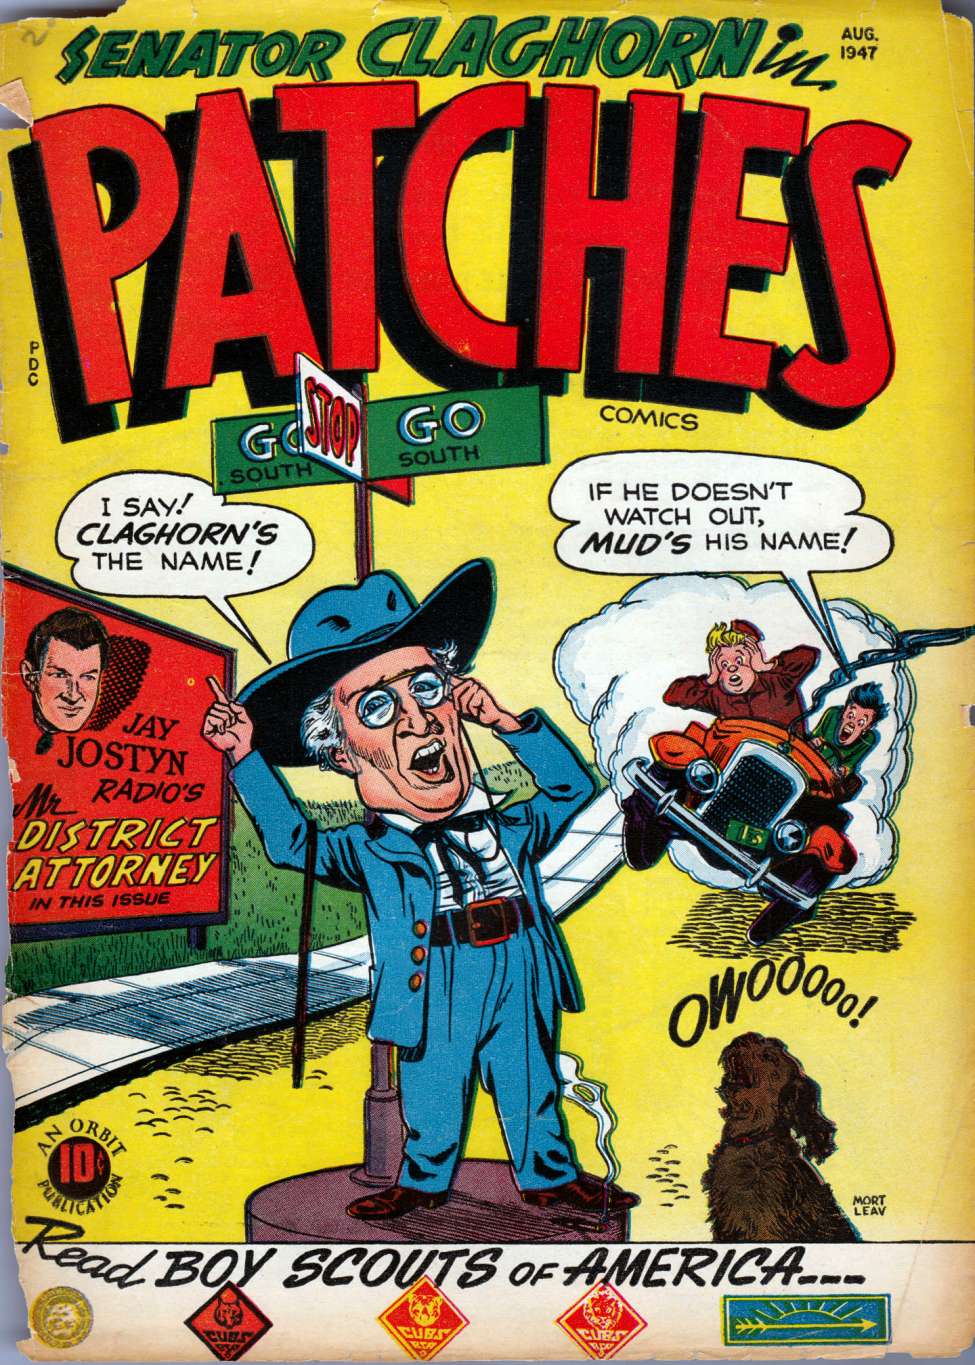 Book Cover For Patches 9